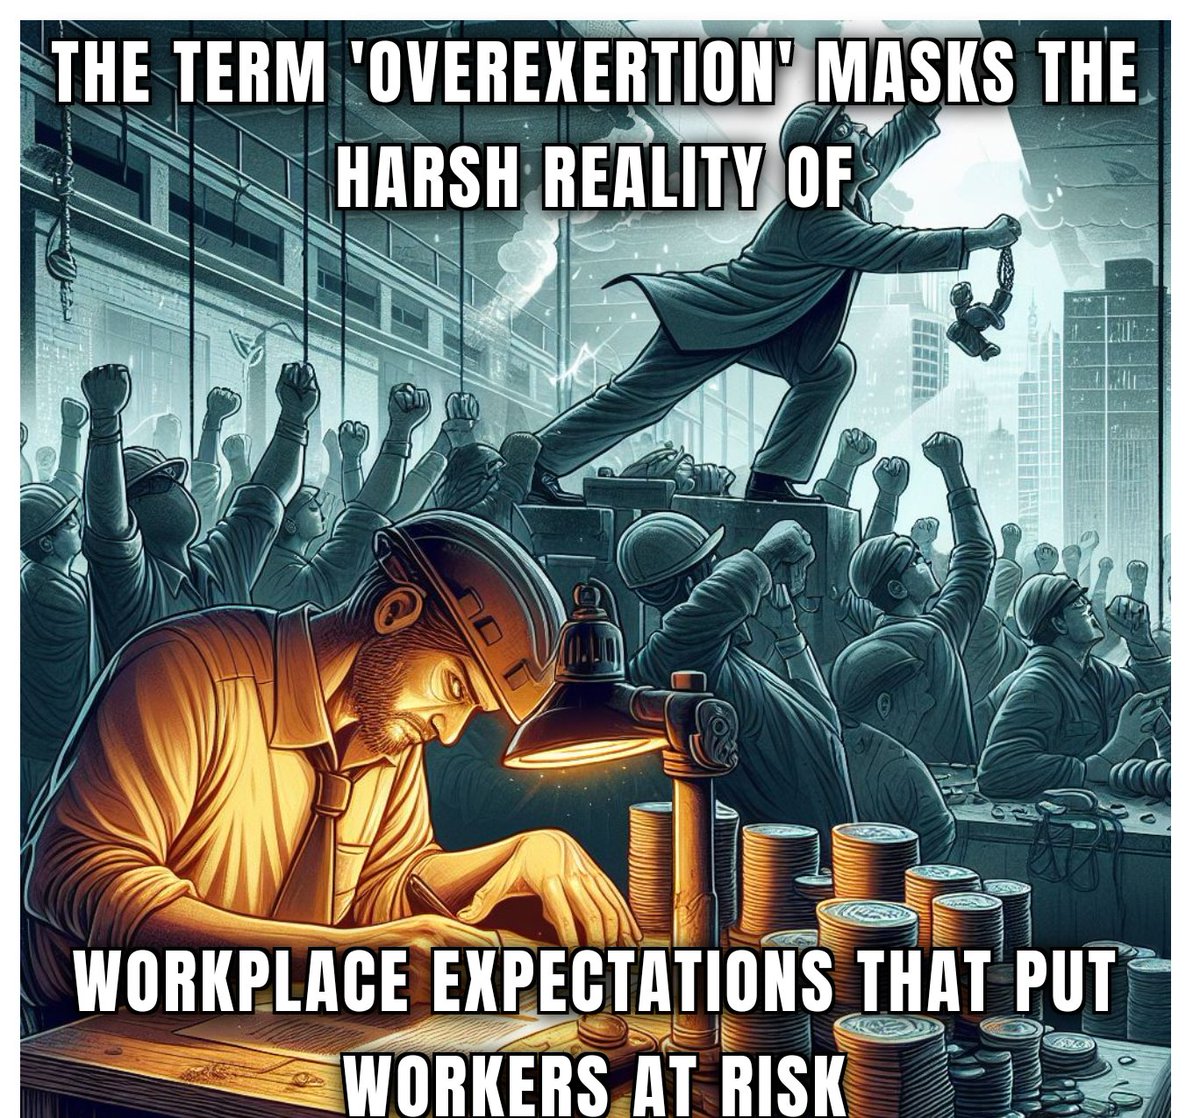 'Overexertion' masks the harsh reality of workplace expectations that put workers at risk. Let's unveil these realities and demand safer conditions for all. #InjuredWorkersUnite #WorkSafetyFirst